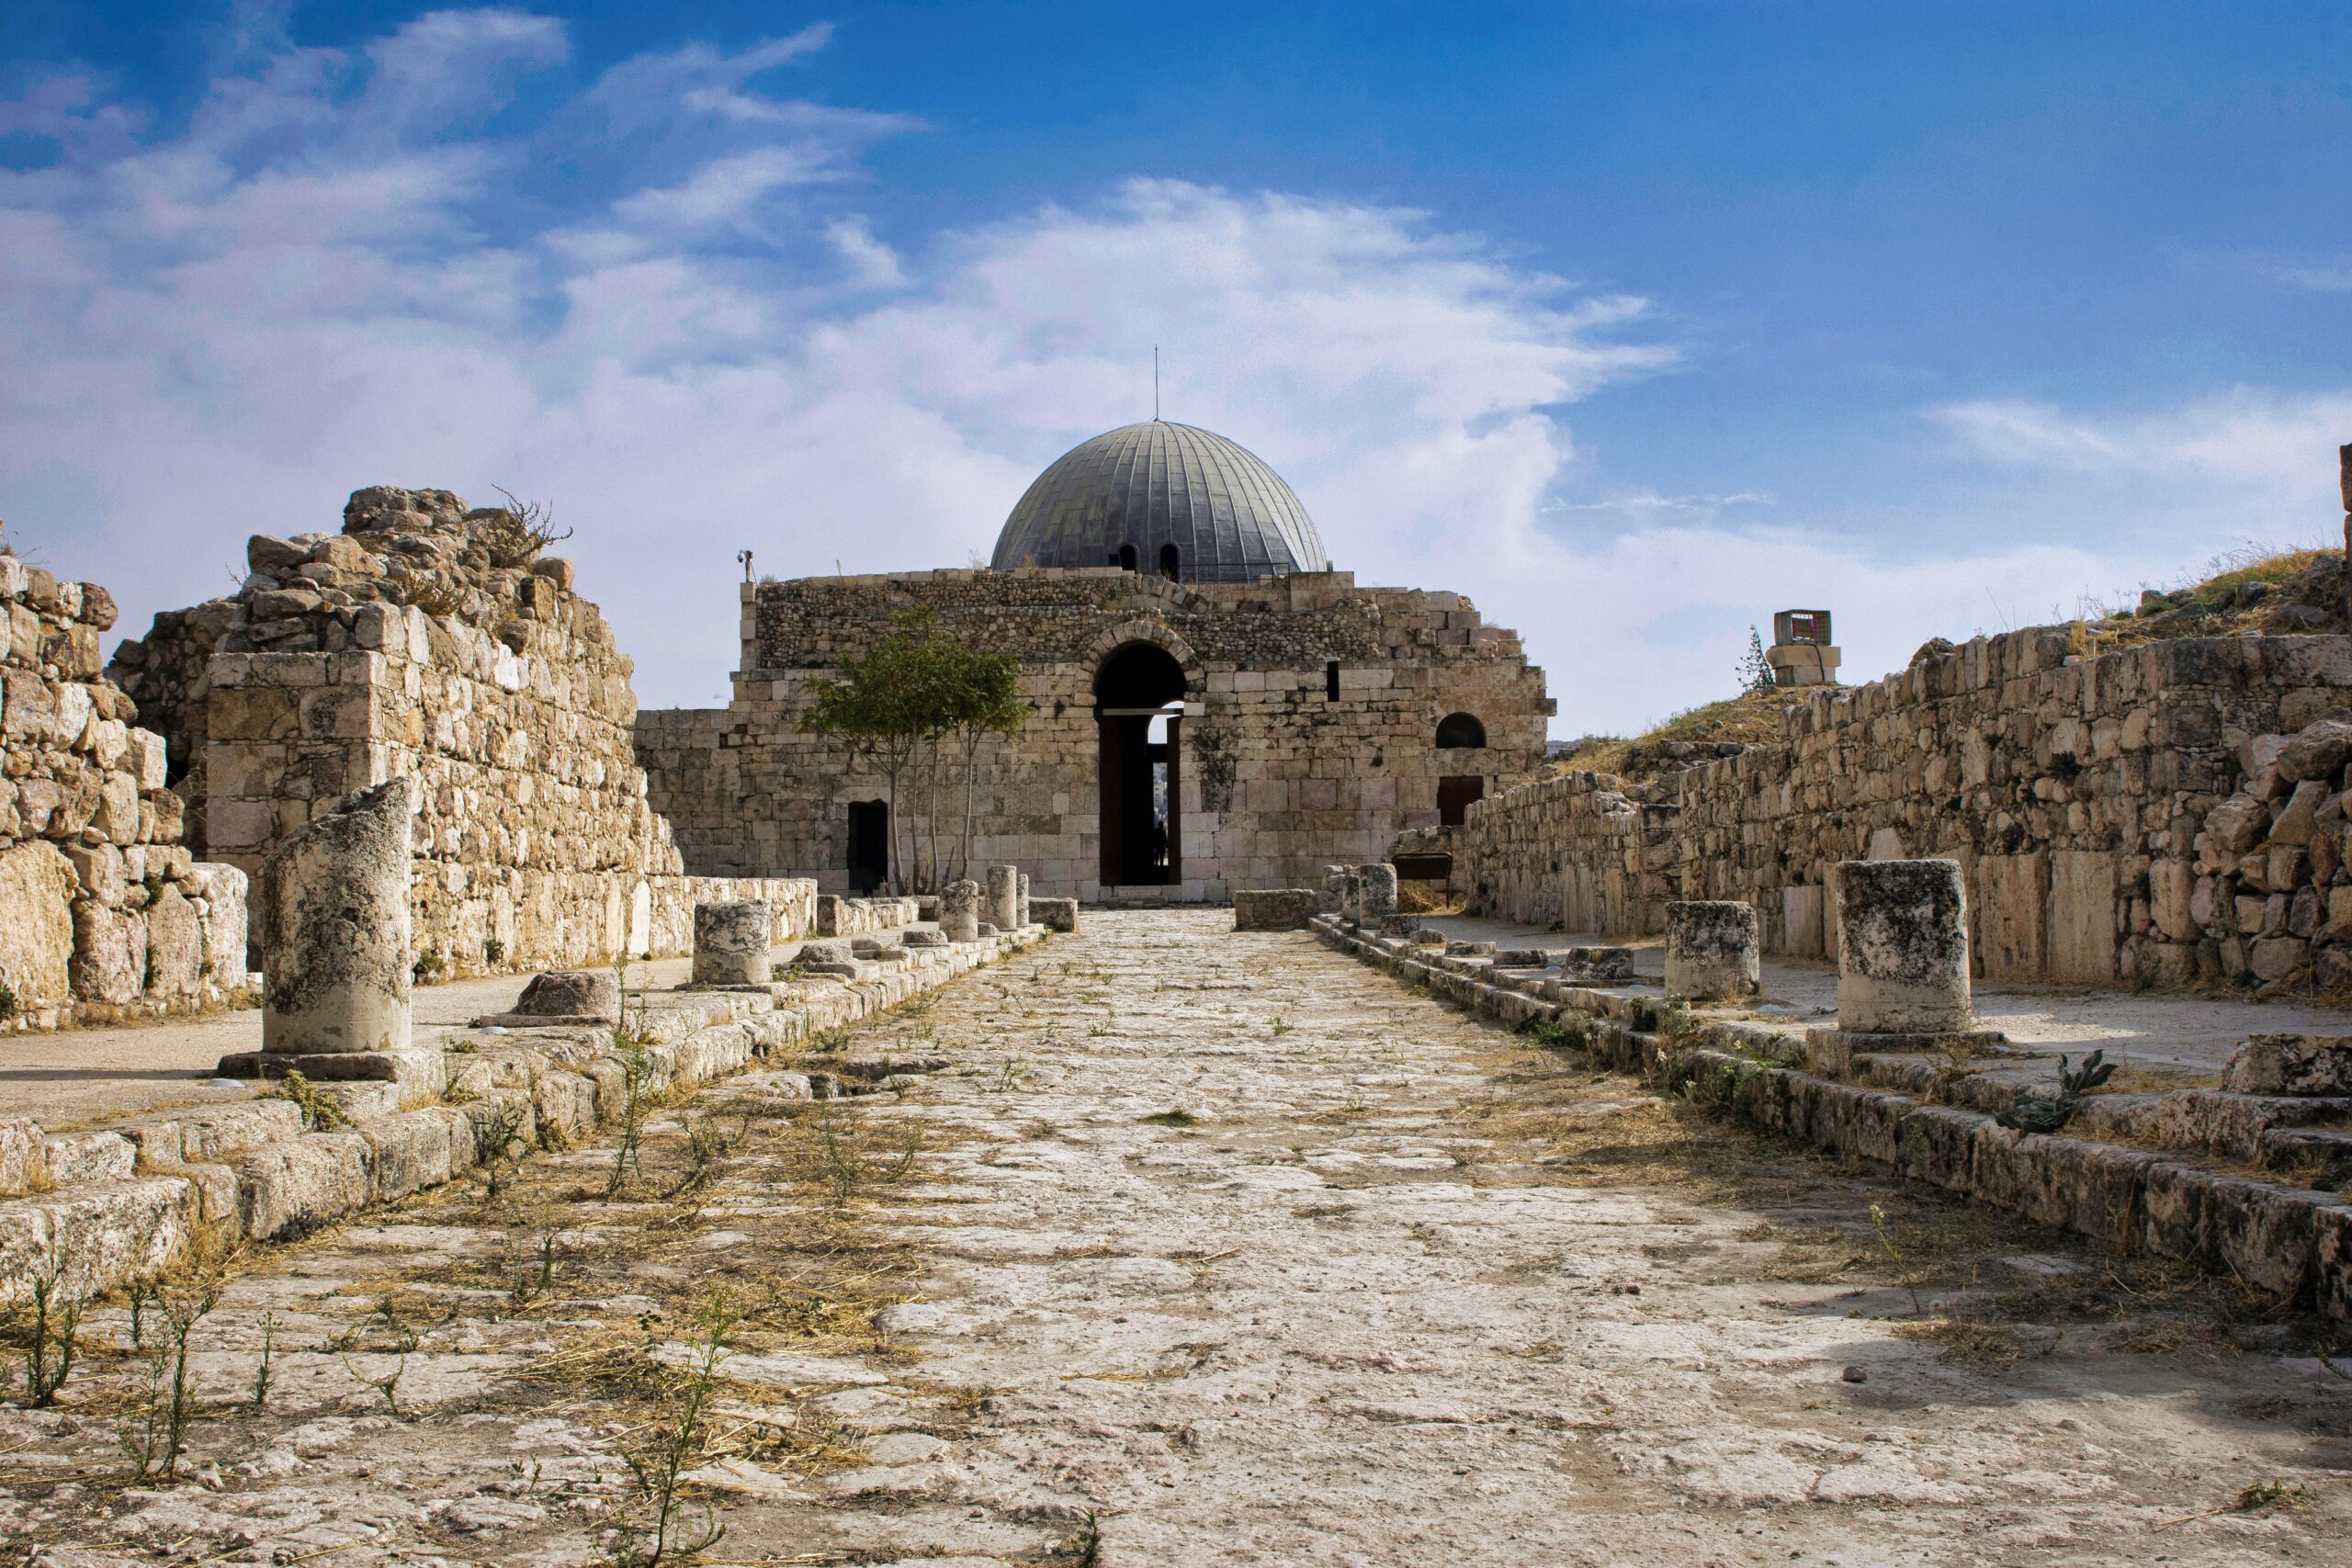 Towering above the capital city of Amman on a hill is the Amman Citadel